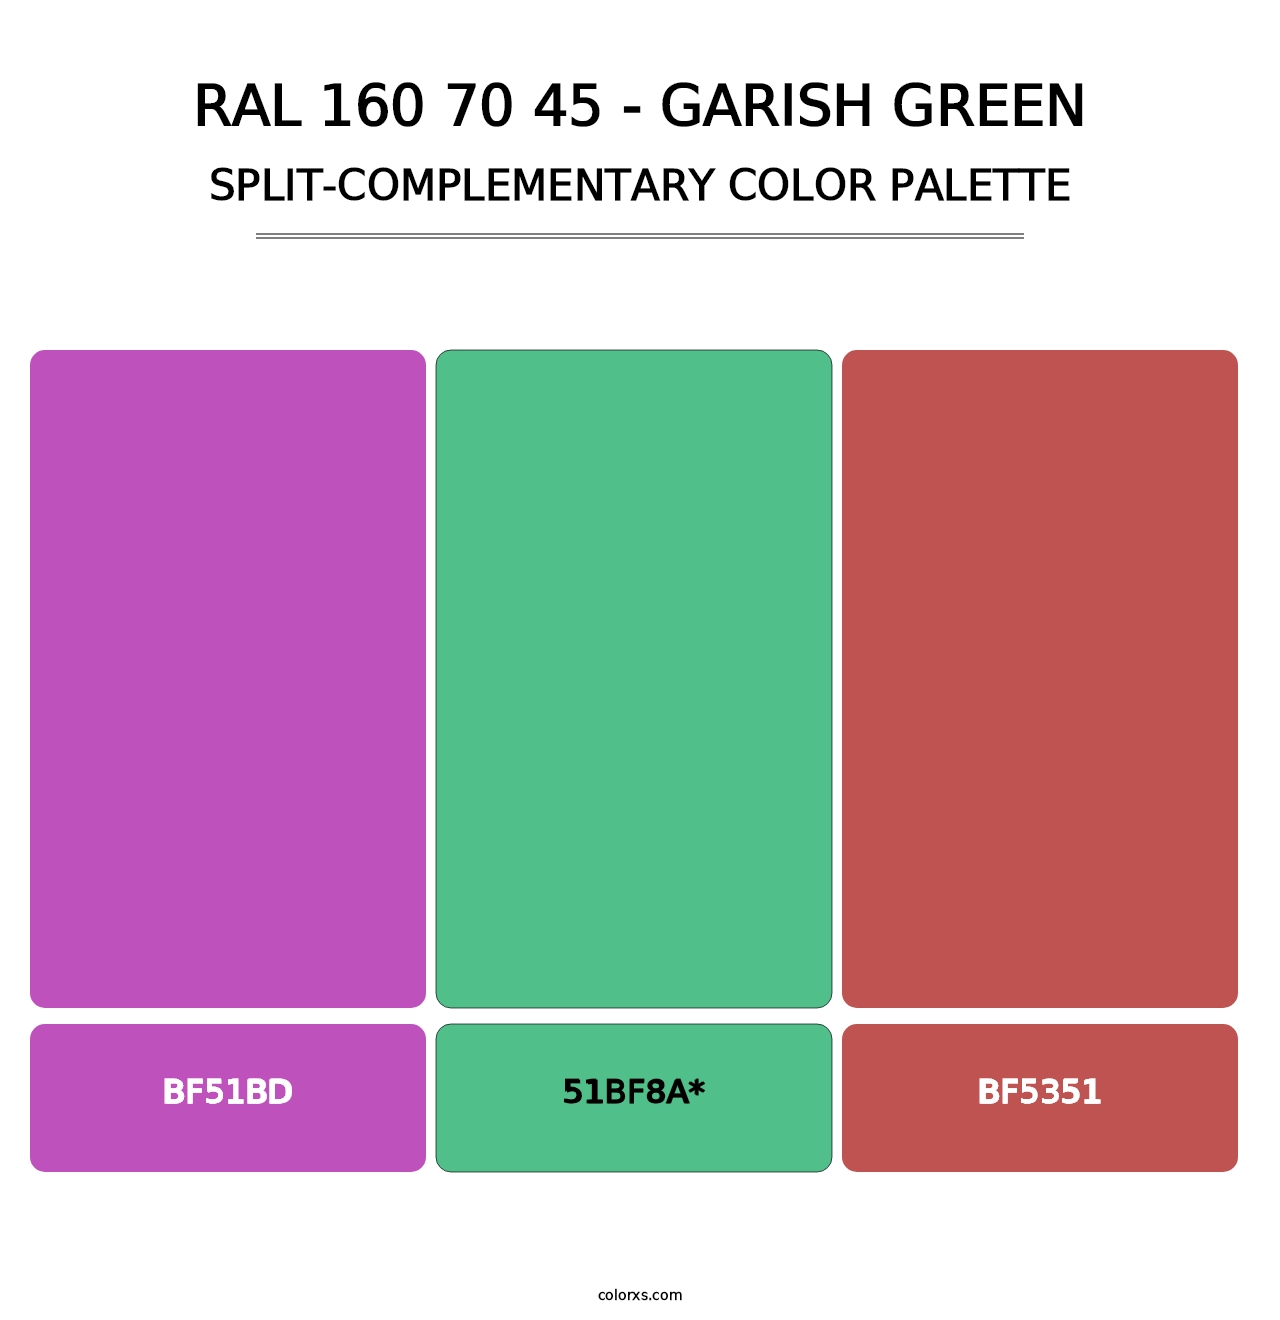 RAL 160 70 45 - Garish Green - Split-Complementary Color Palette